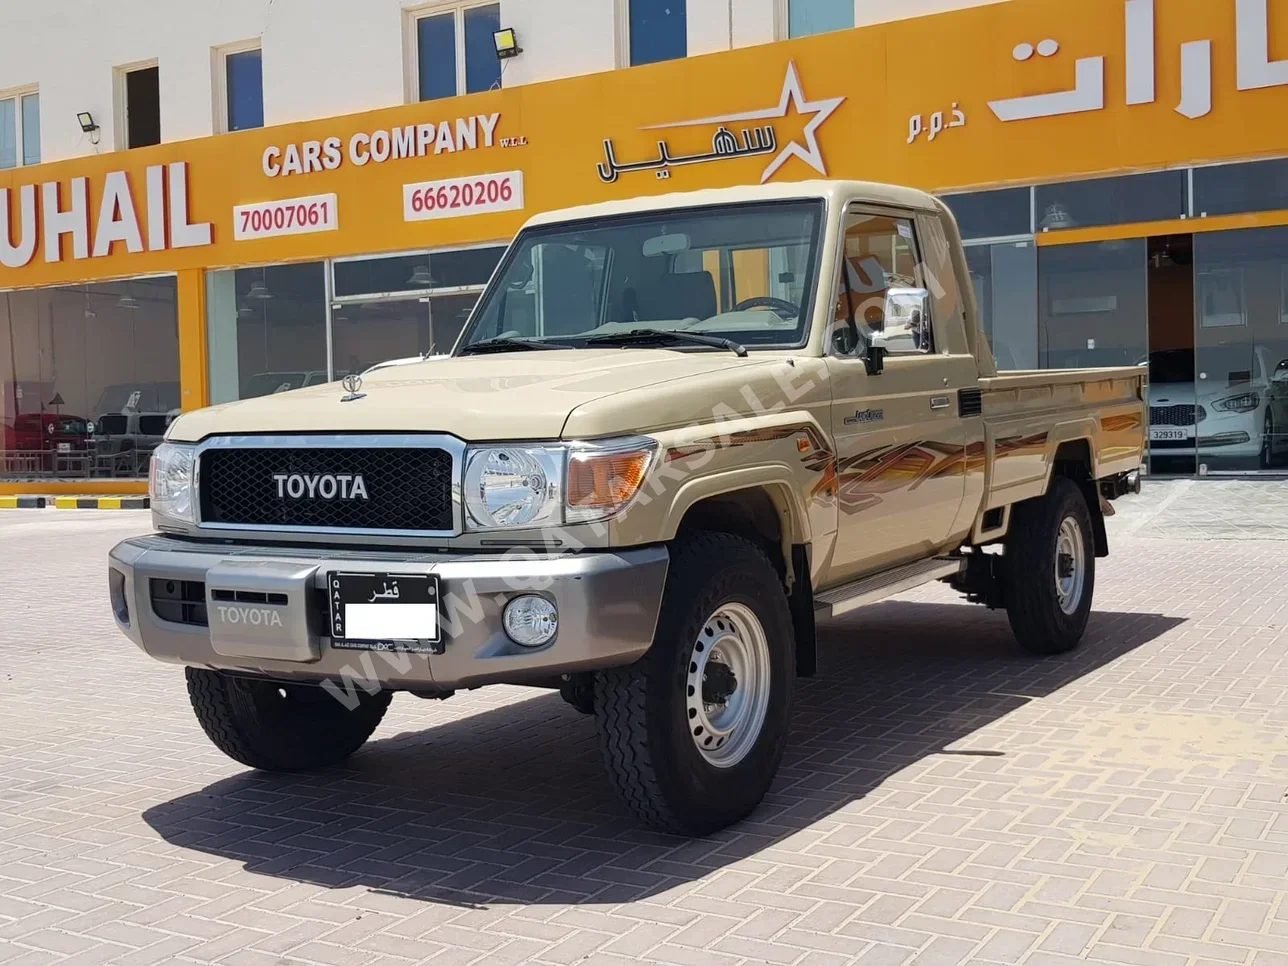 Toyota  Land Cruiser  LX  2023  Manual  16,000 Km  6 Cylinder  Four Wheel Drive (4WD)  Pick Up  Beige  With Warranty